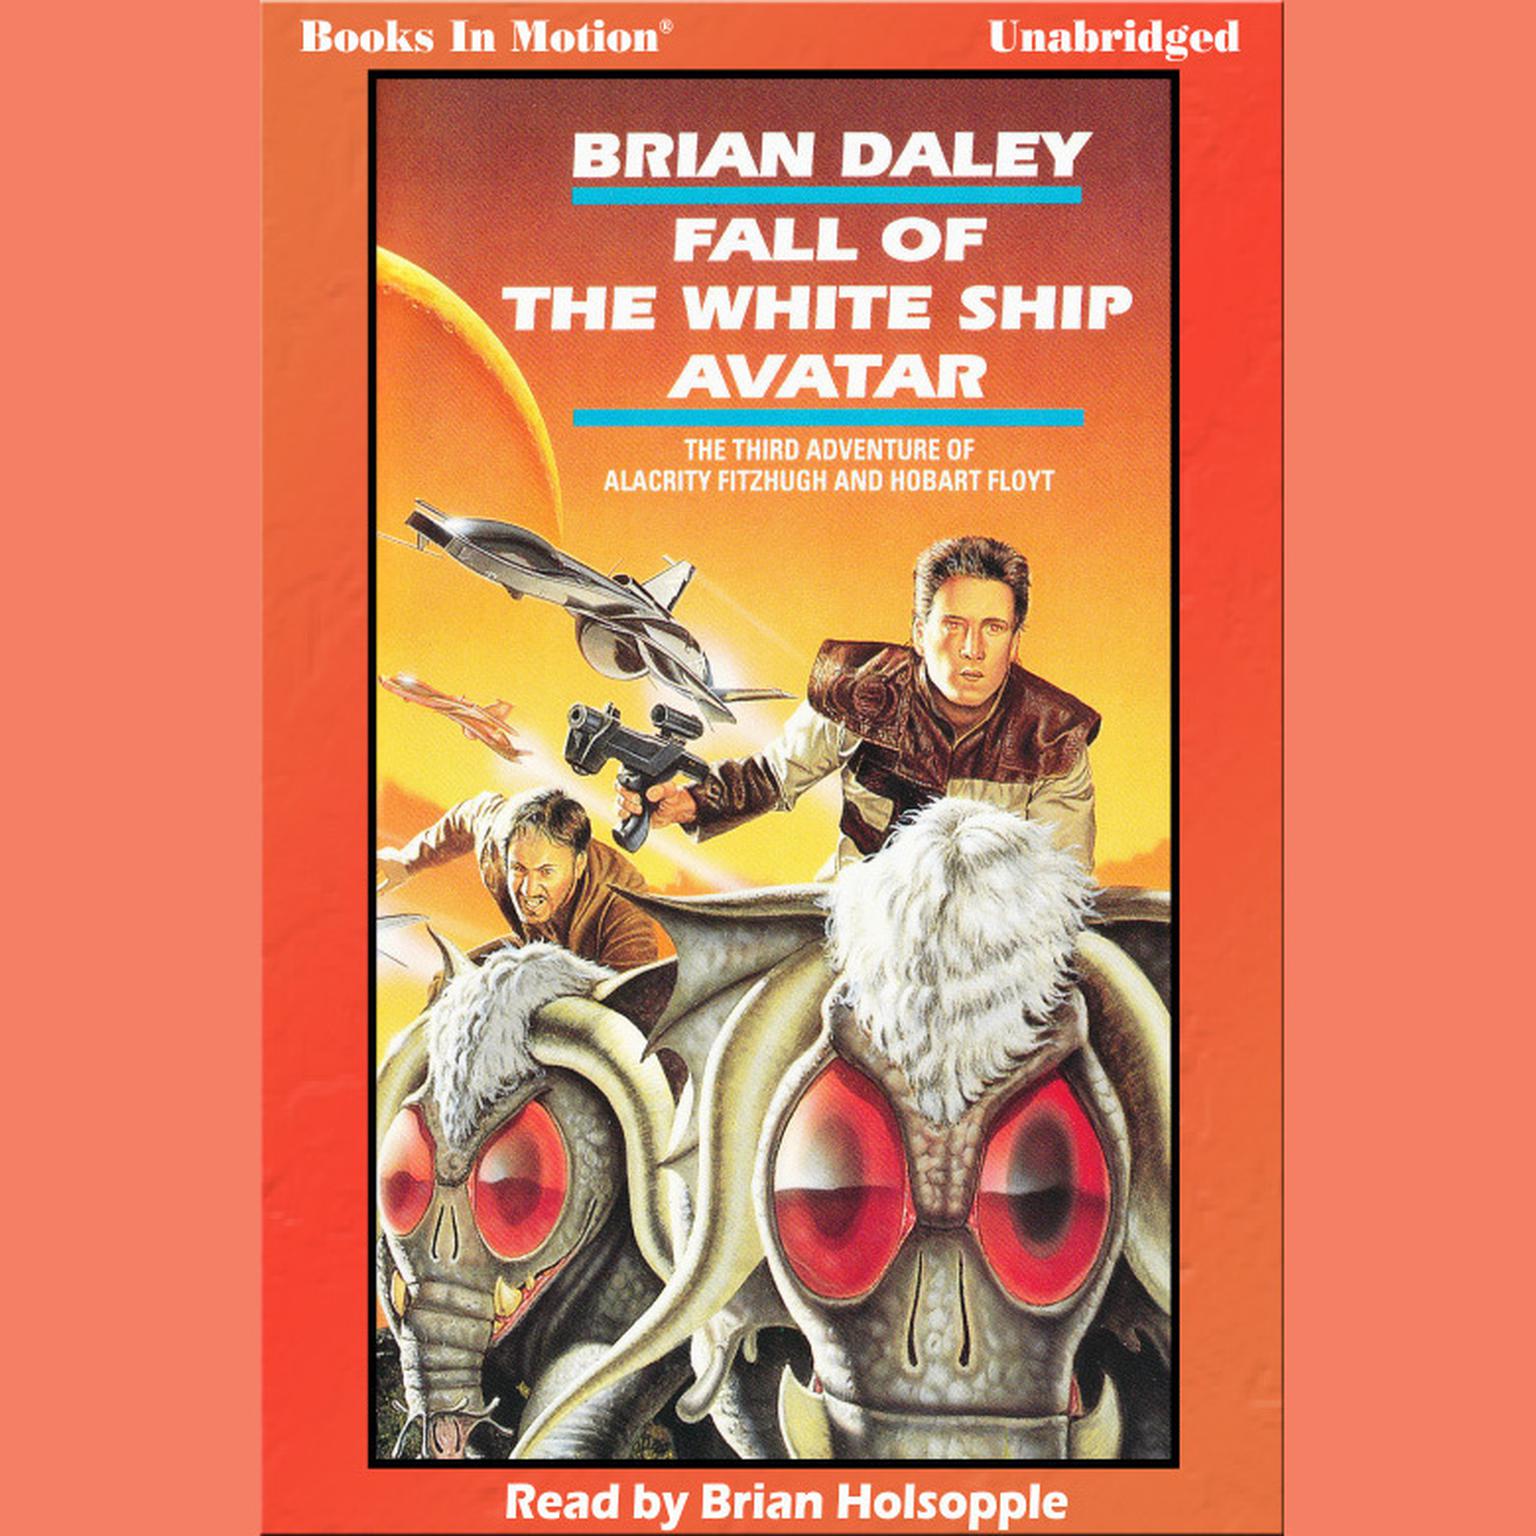 Fall of the White Ship Avatar Audiobook, by Brian Daley